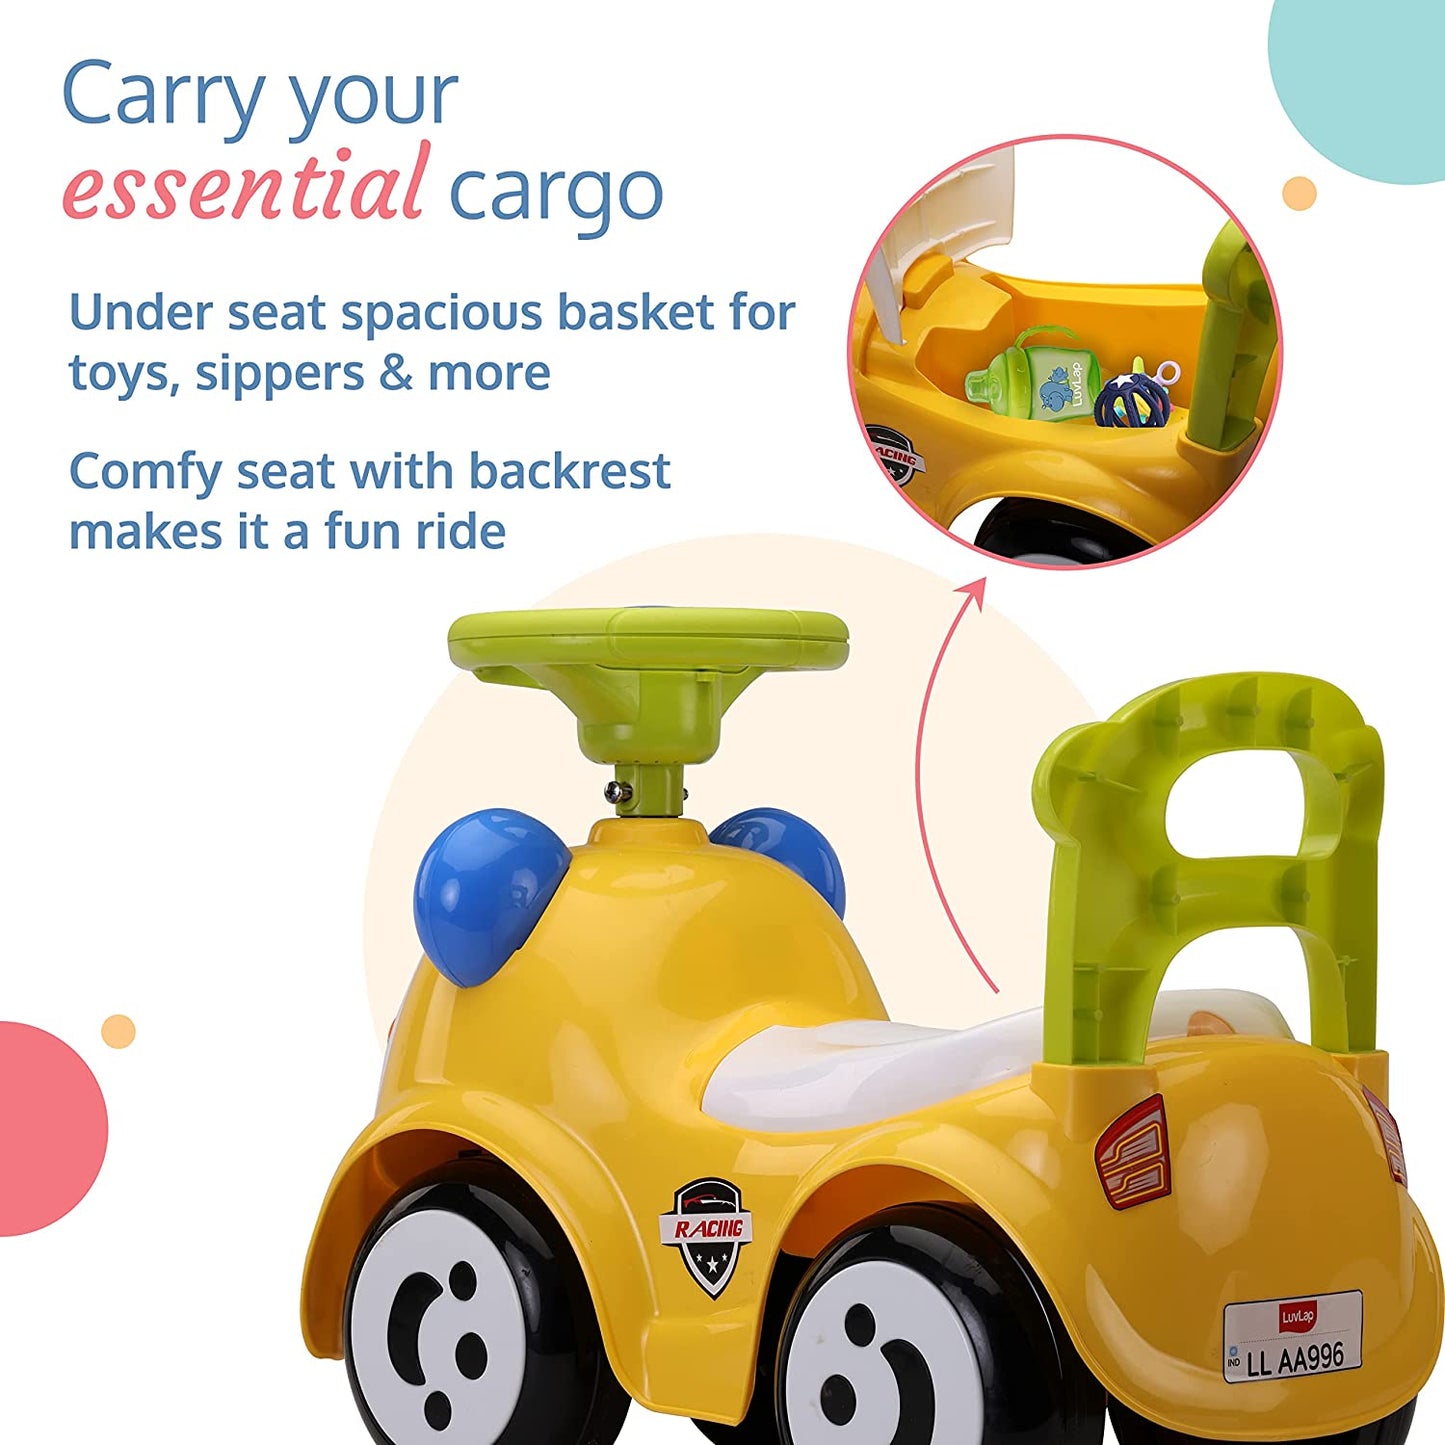 LuvLap Sunny Ride on & Car for Kids with Music & Horn Steering, Push Car for Baby with Backrest, Safety Guard, Under Seat Storage & Big Wheels, Ride on for Kids 1 to 3 Years Upto 25 Kgs (Yellow)